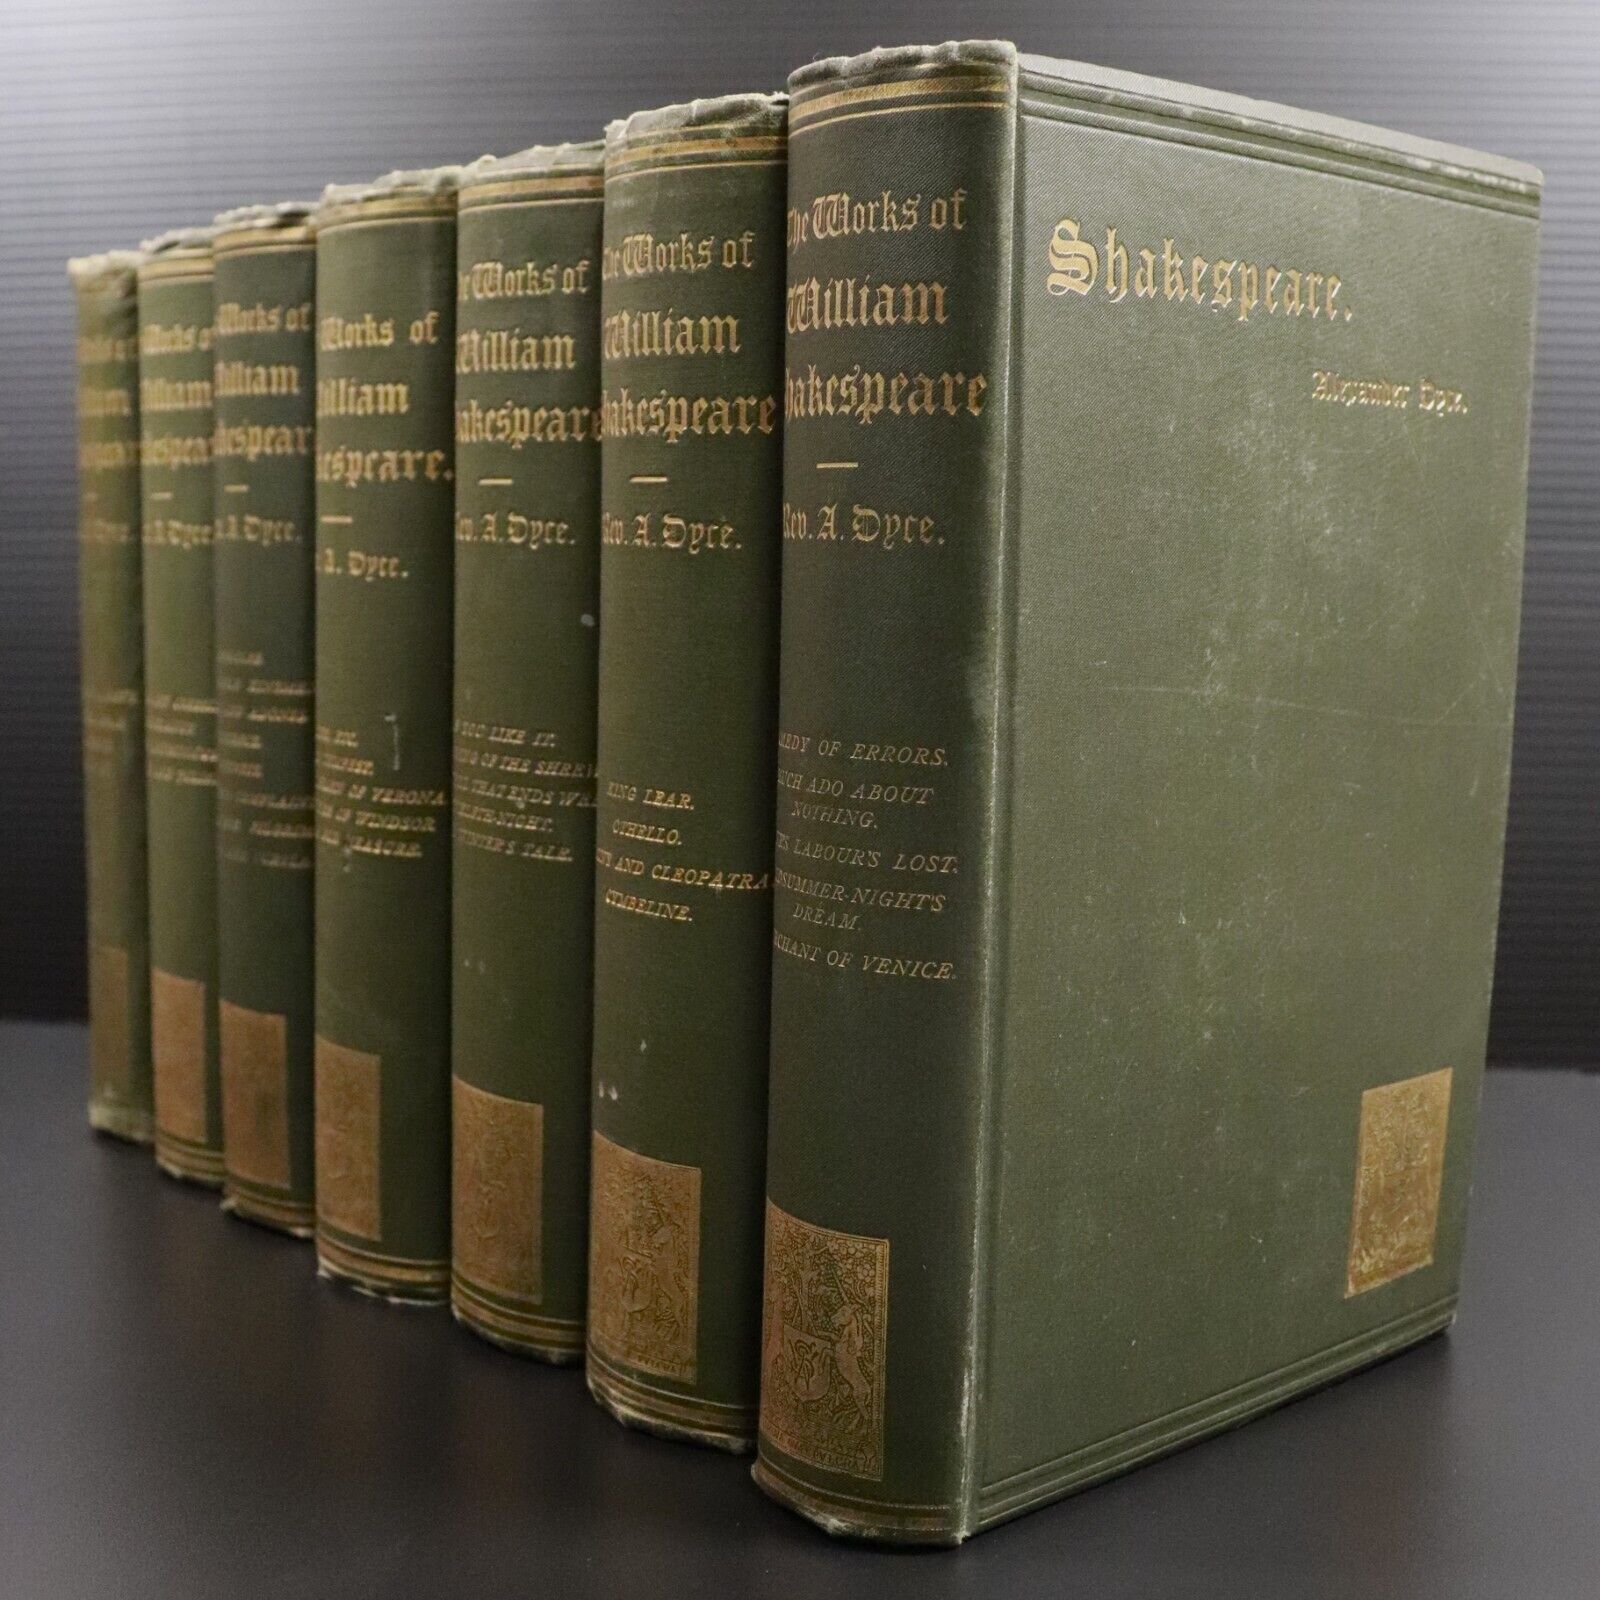 1886 7vol Works Of William Shakespeare by Alexander Dyce Antique Books